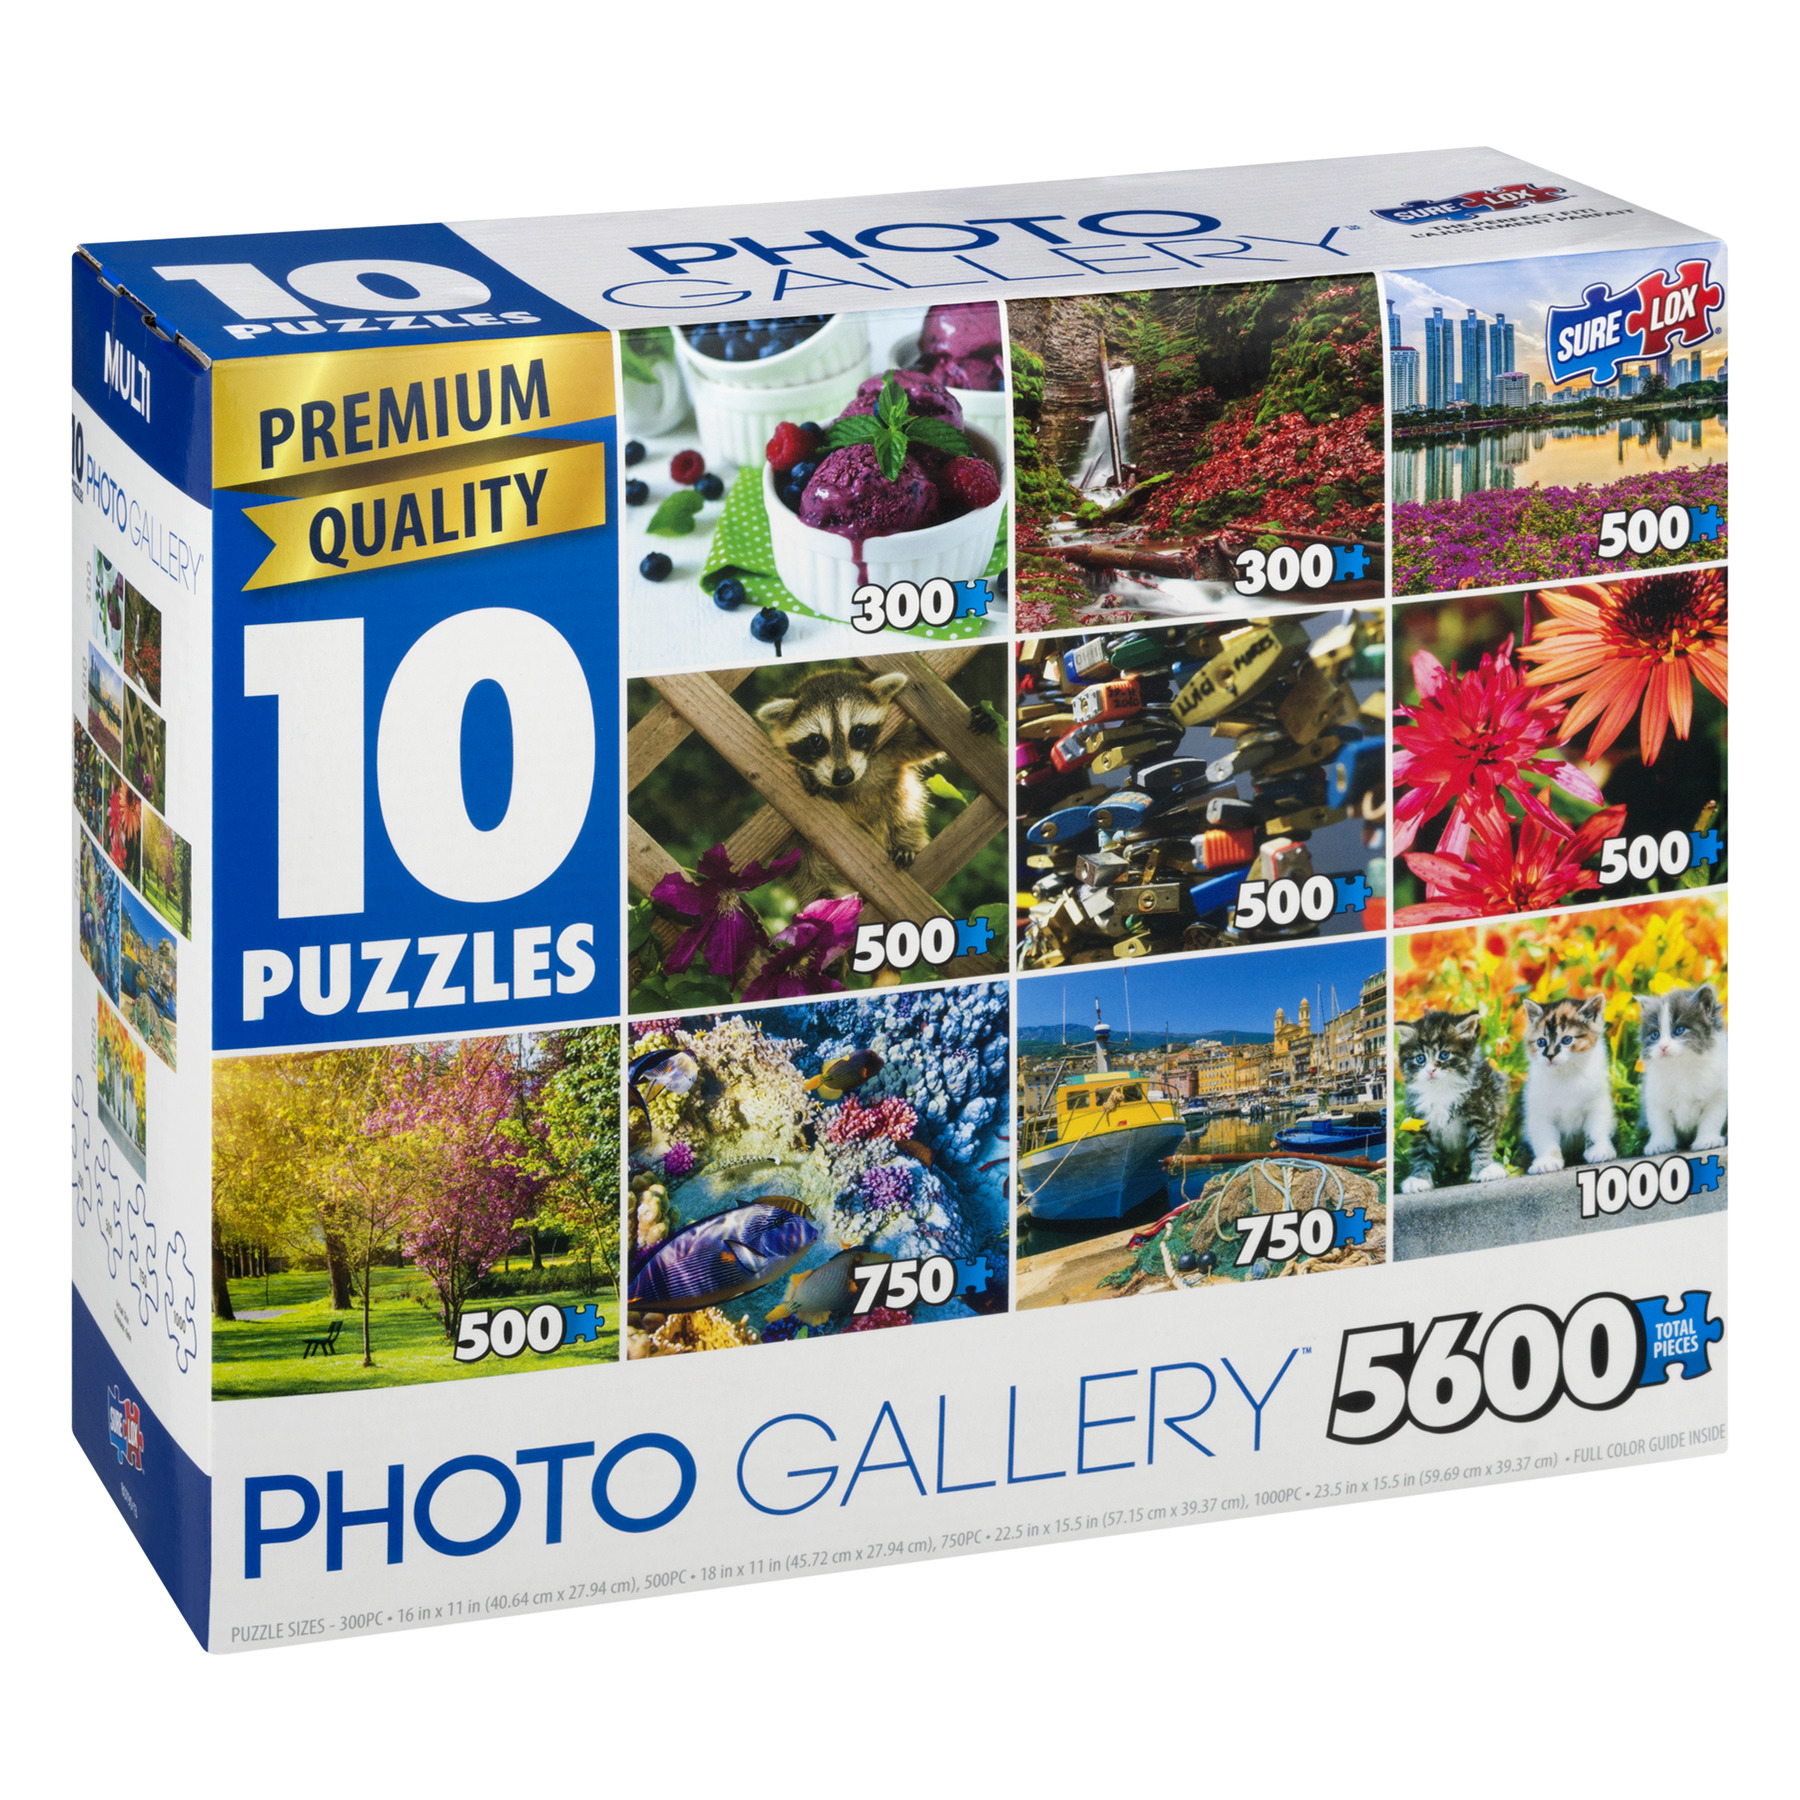 Photo Gallery Puzzles (5600 Pieces) Only $7.99! (Reg $25.47)